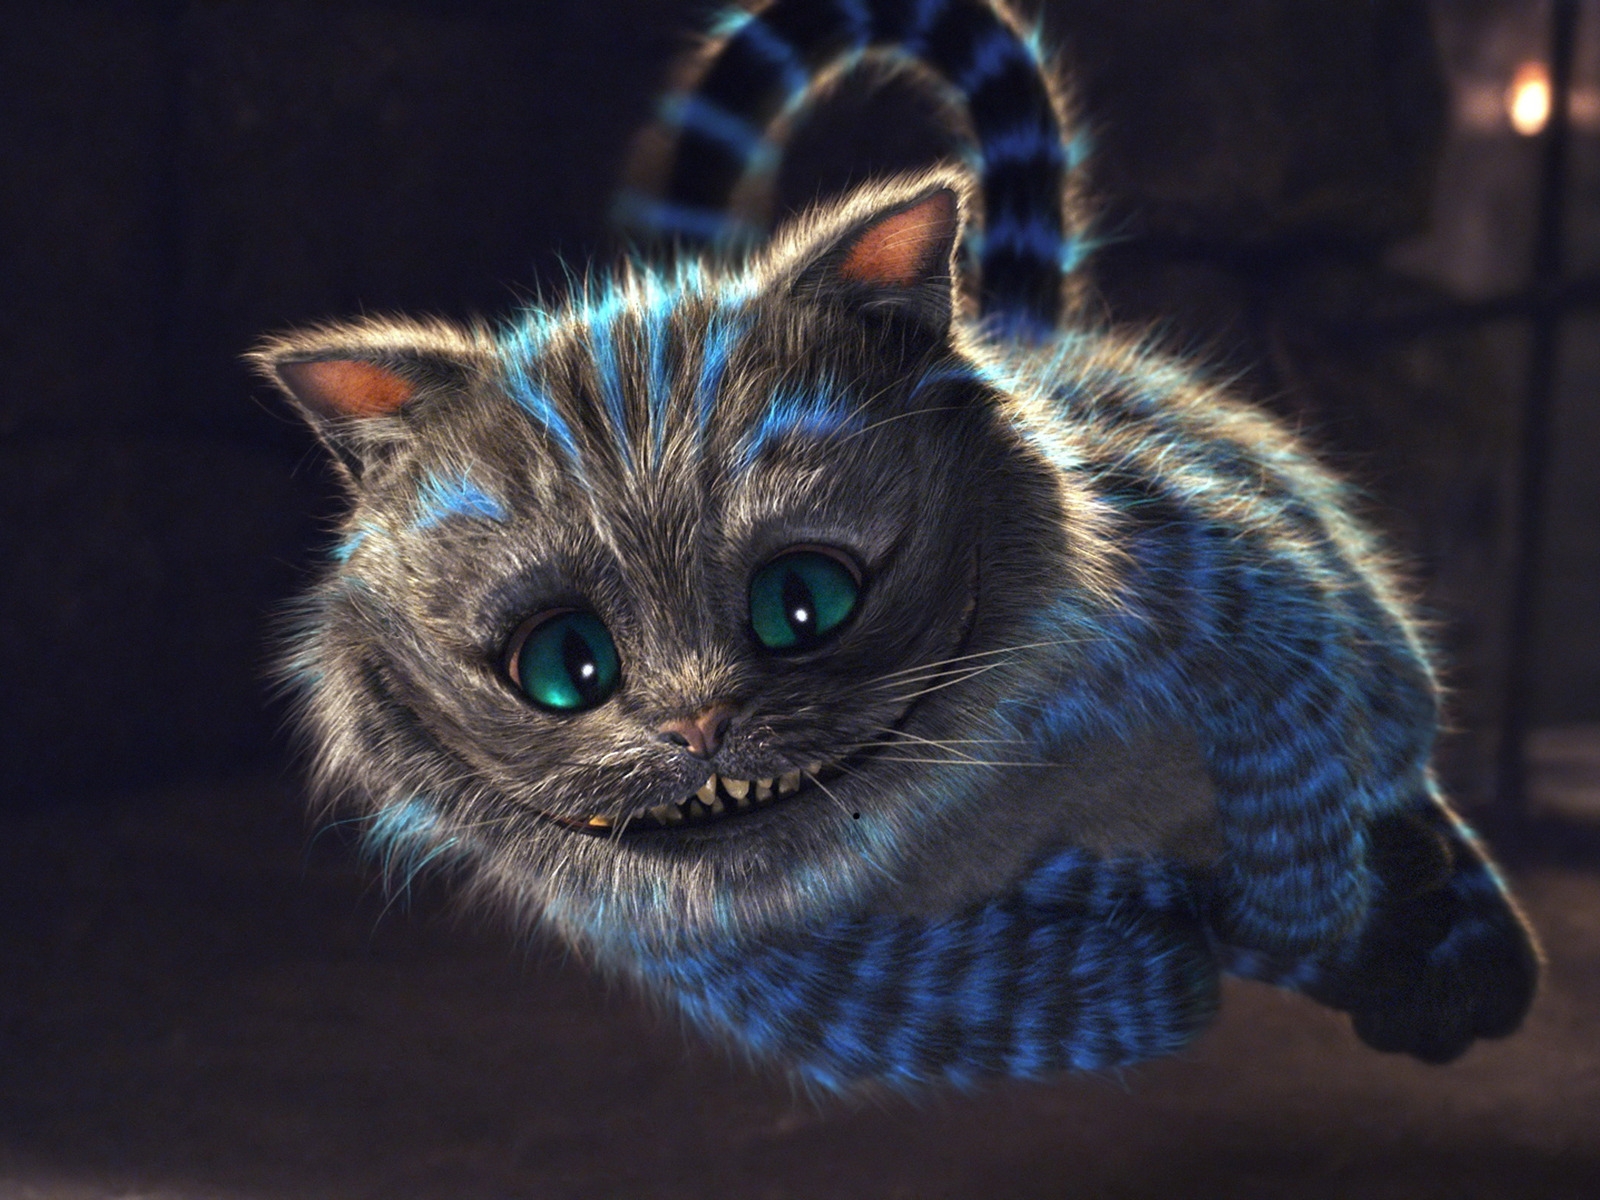 Alice in Wonderland The Cheshire Cat for 1600 x 1200 resolution